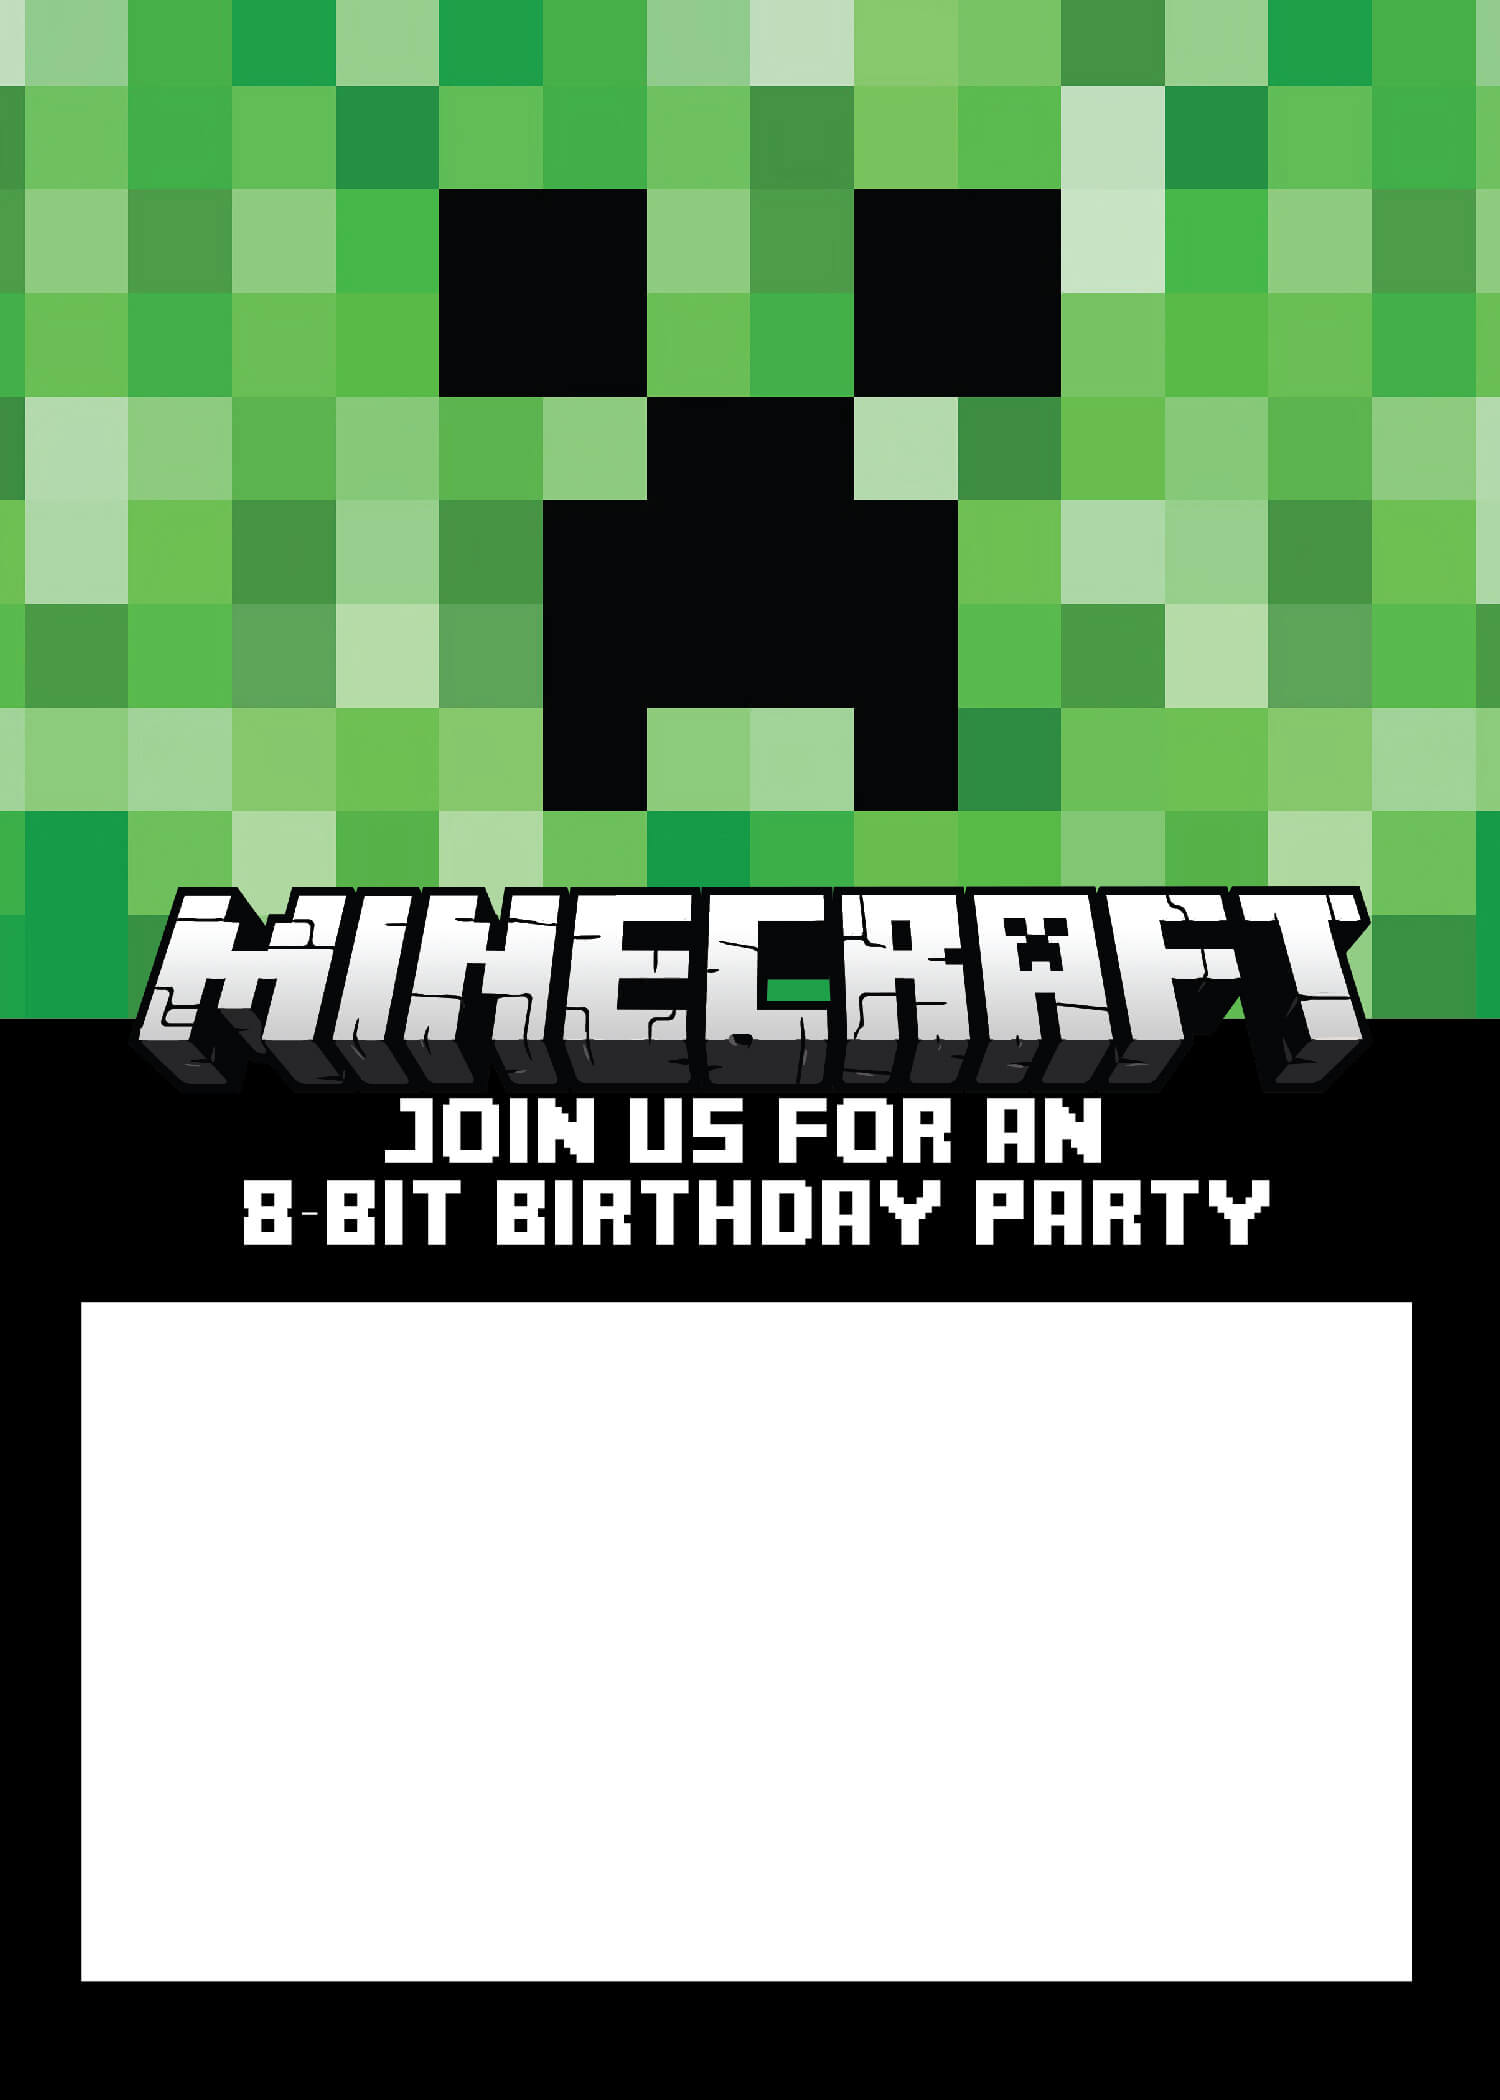 Free Printable Online Invitations Invitation Card Maker With Minecraft Birthday Card Template